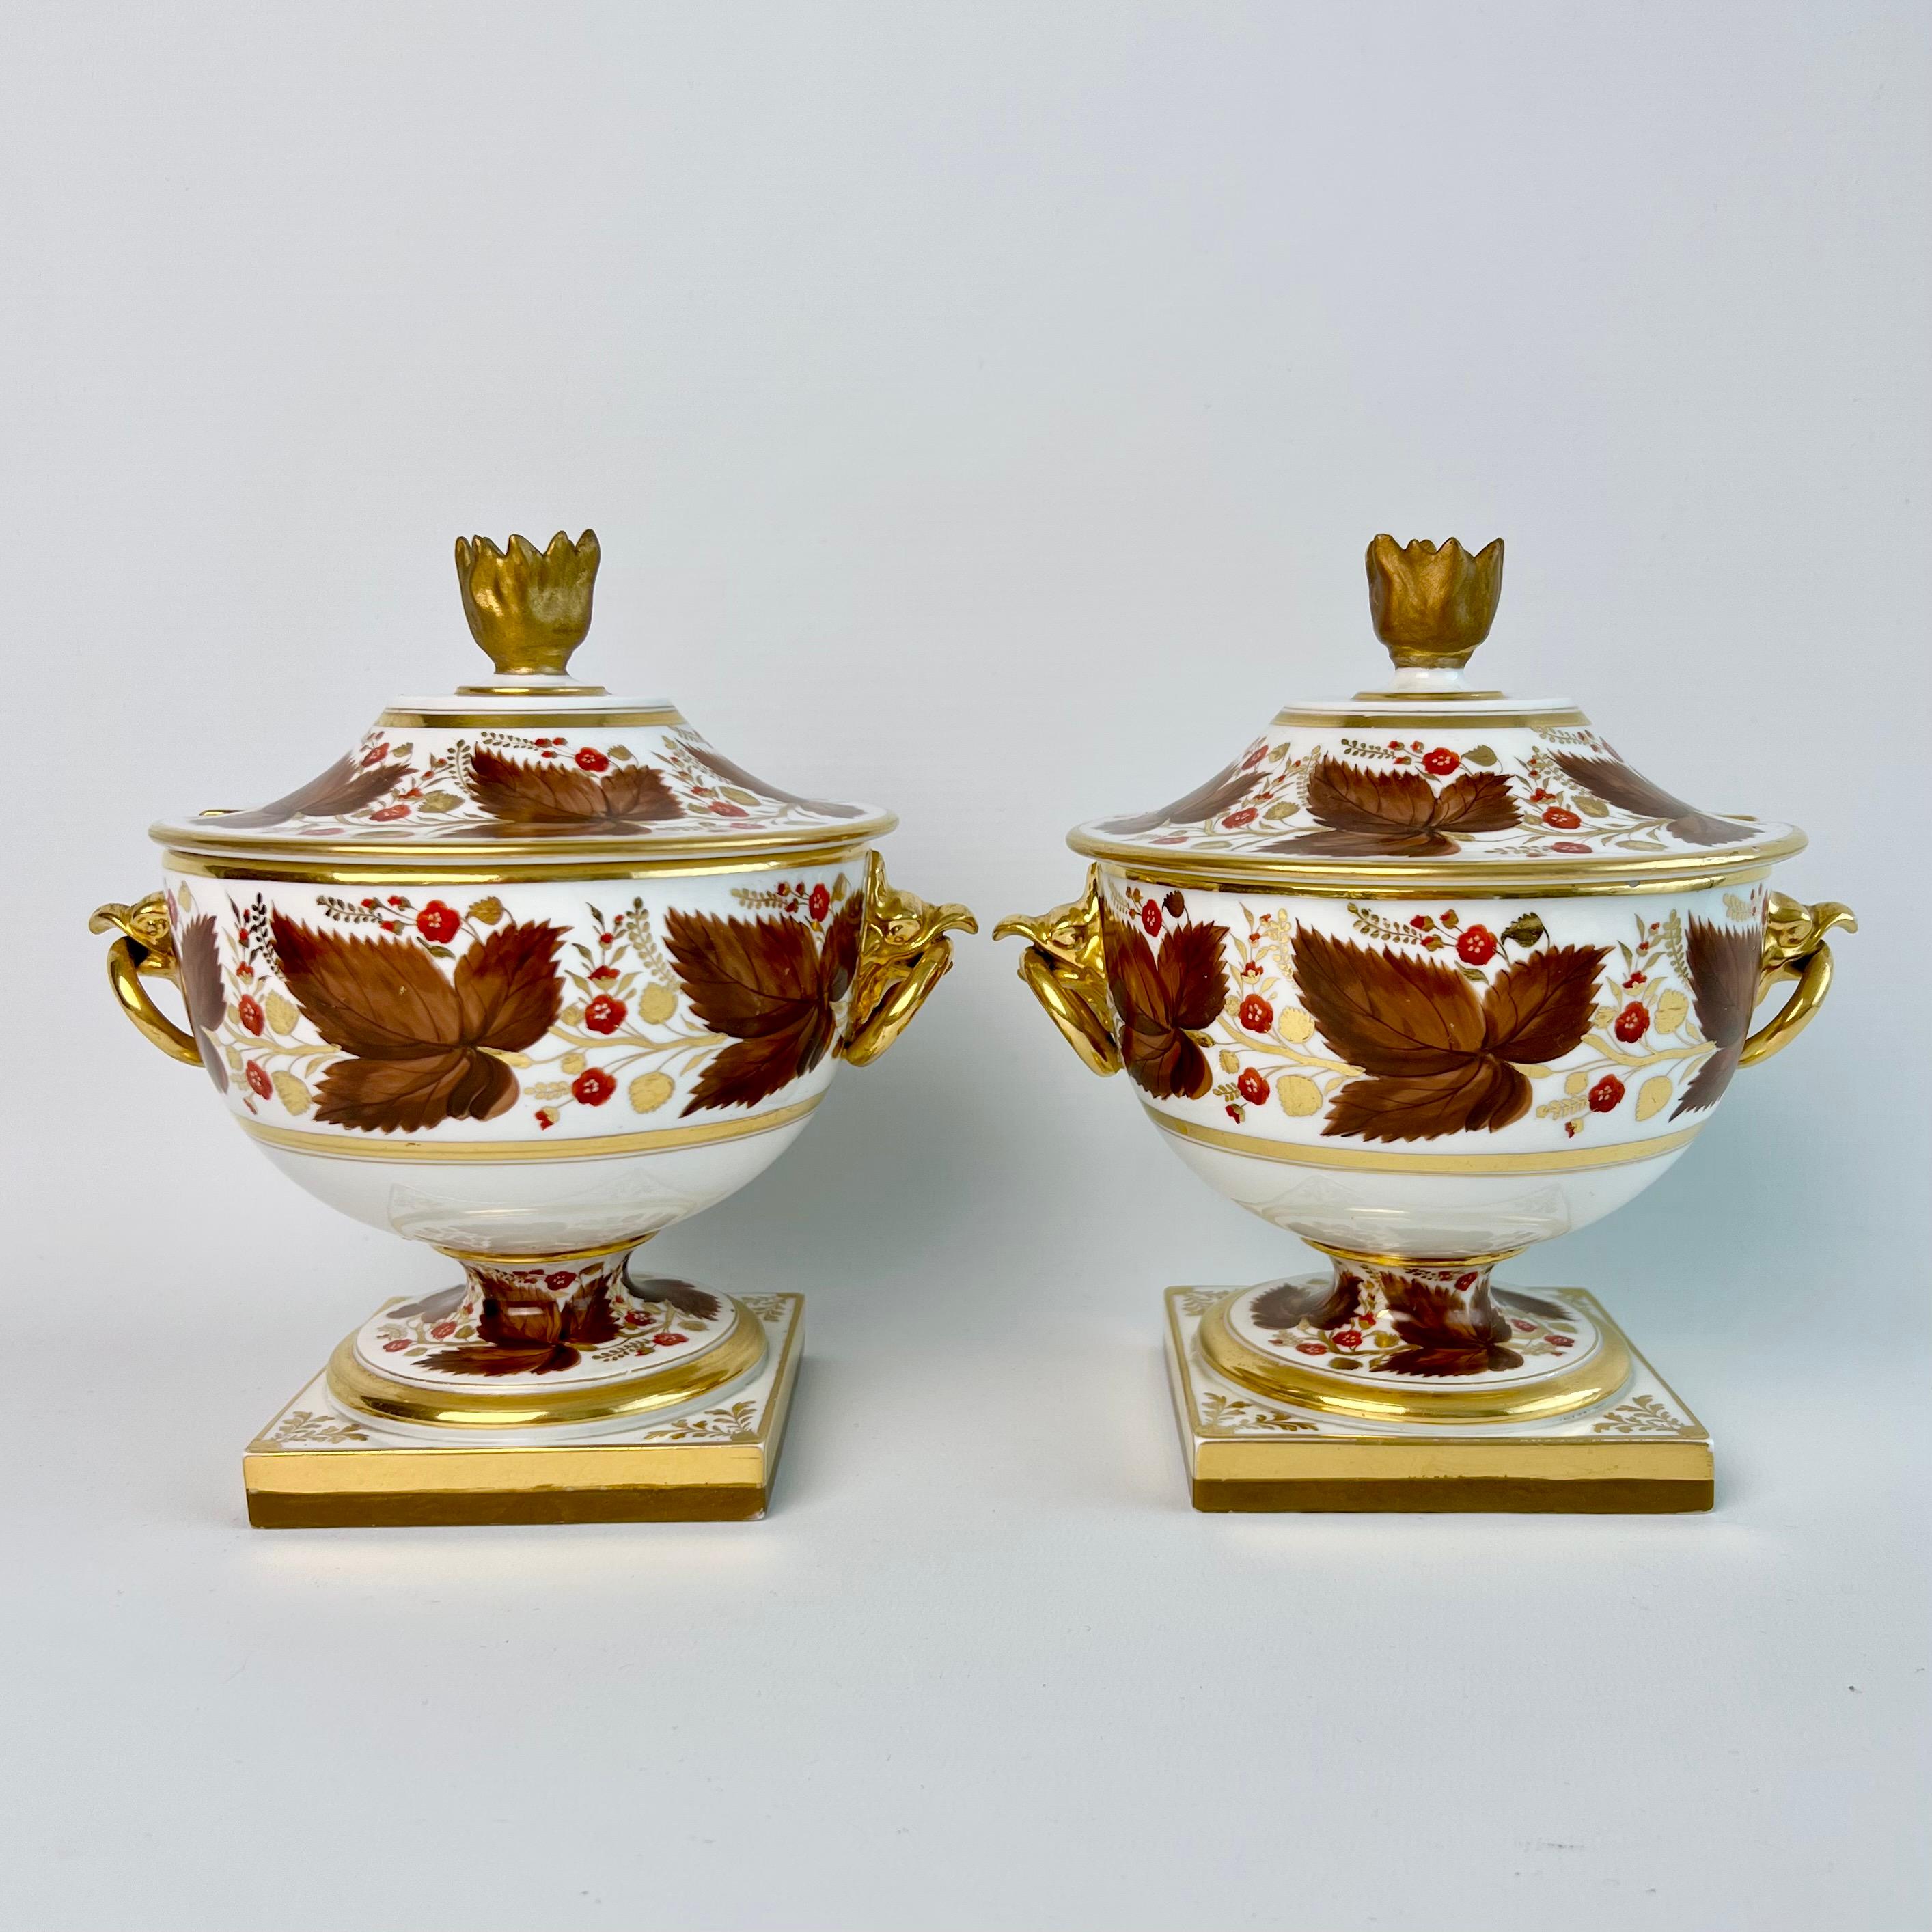 English Flight Barr & Barr Dessert Service, Brown Vines and Berries, 1815-1820 For Sale